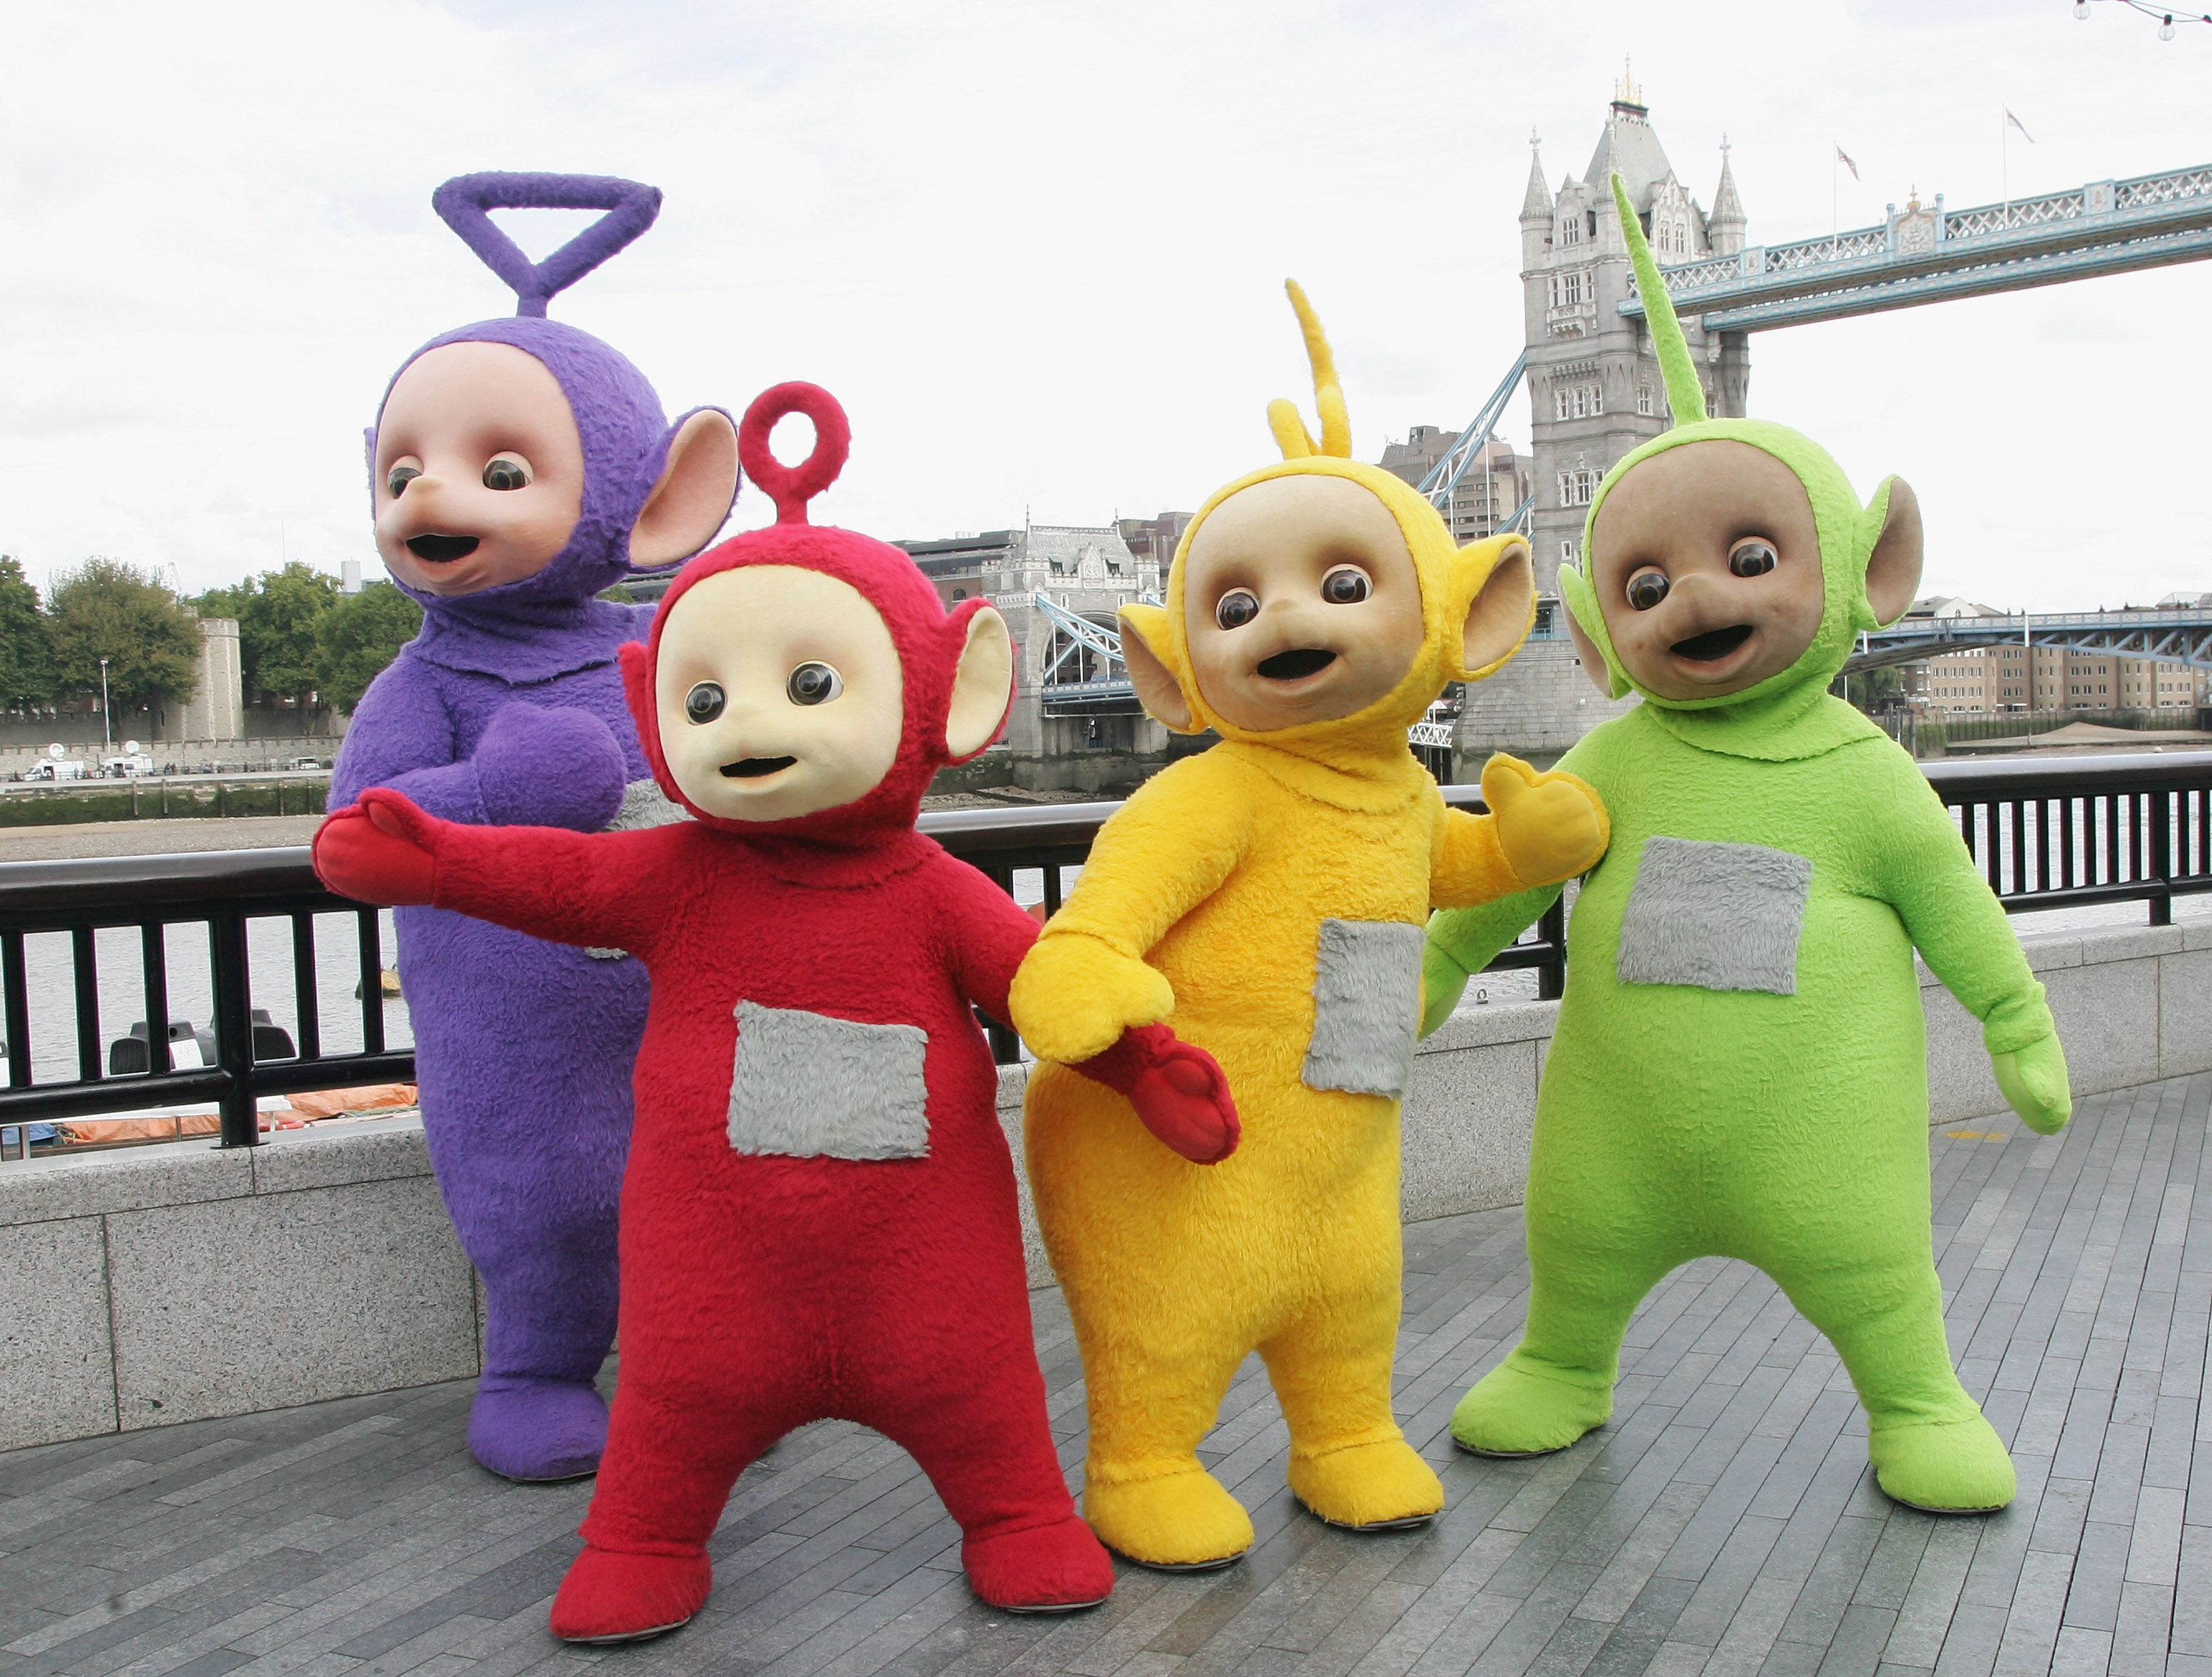 Thicc lady teletubbies cosplay ese. Телепузики тинки винки. Телепузики имена тинки винки.